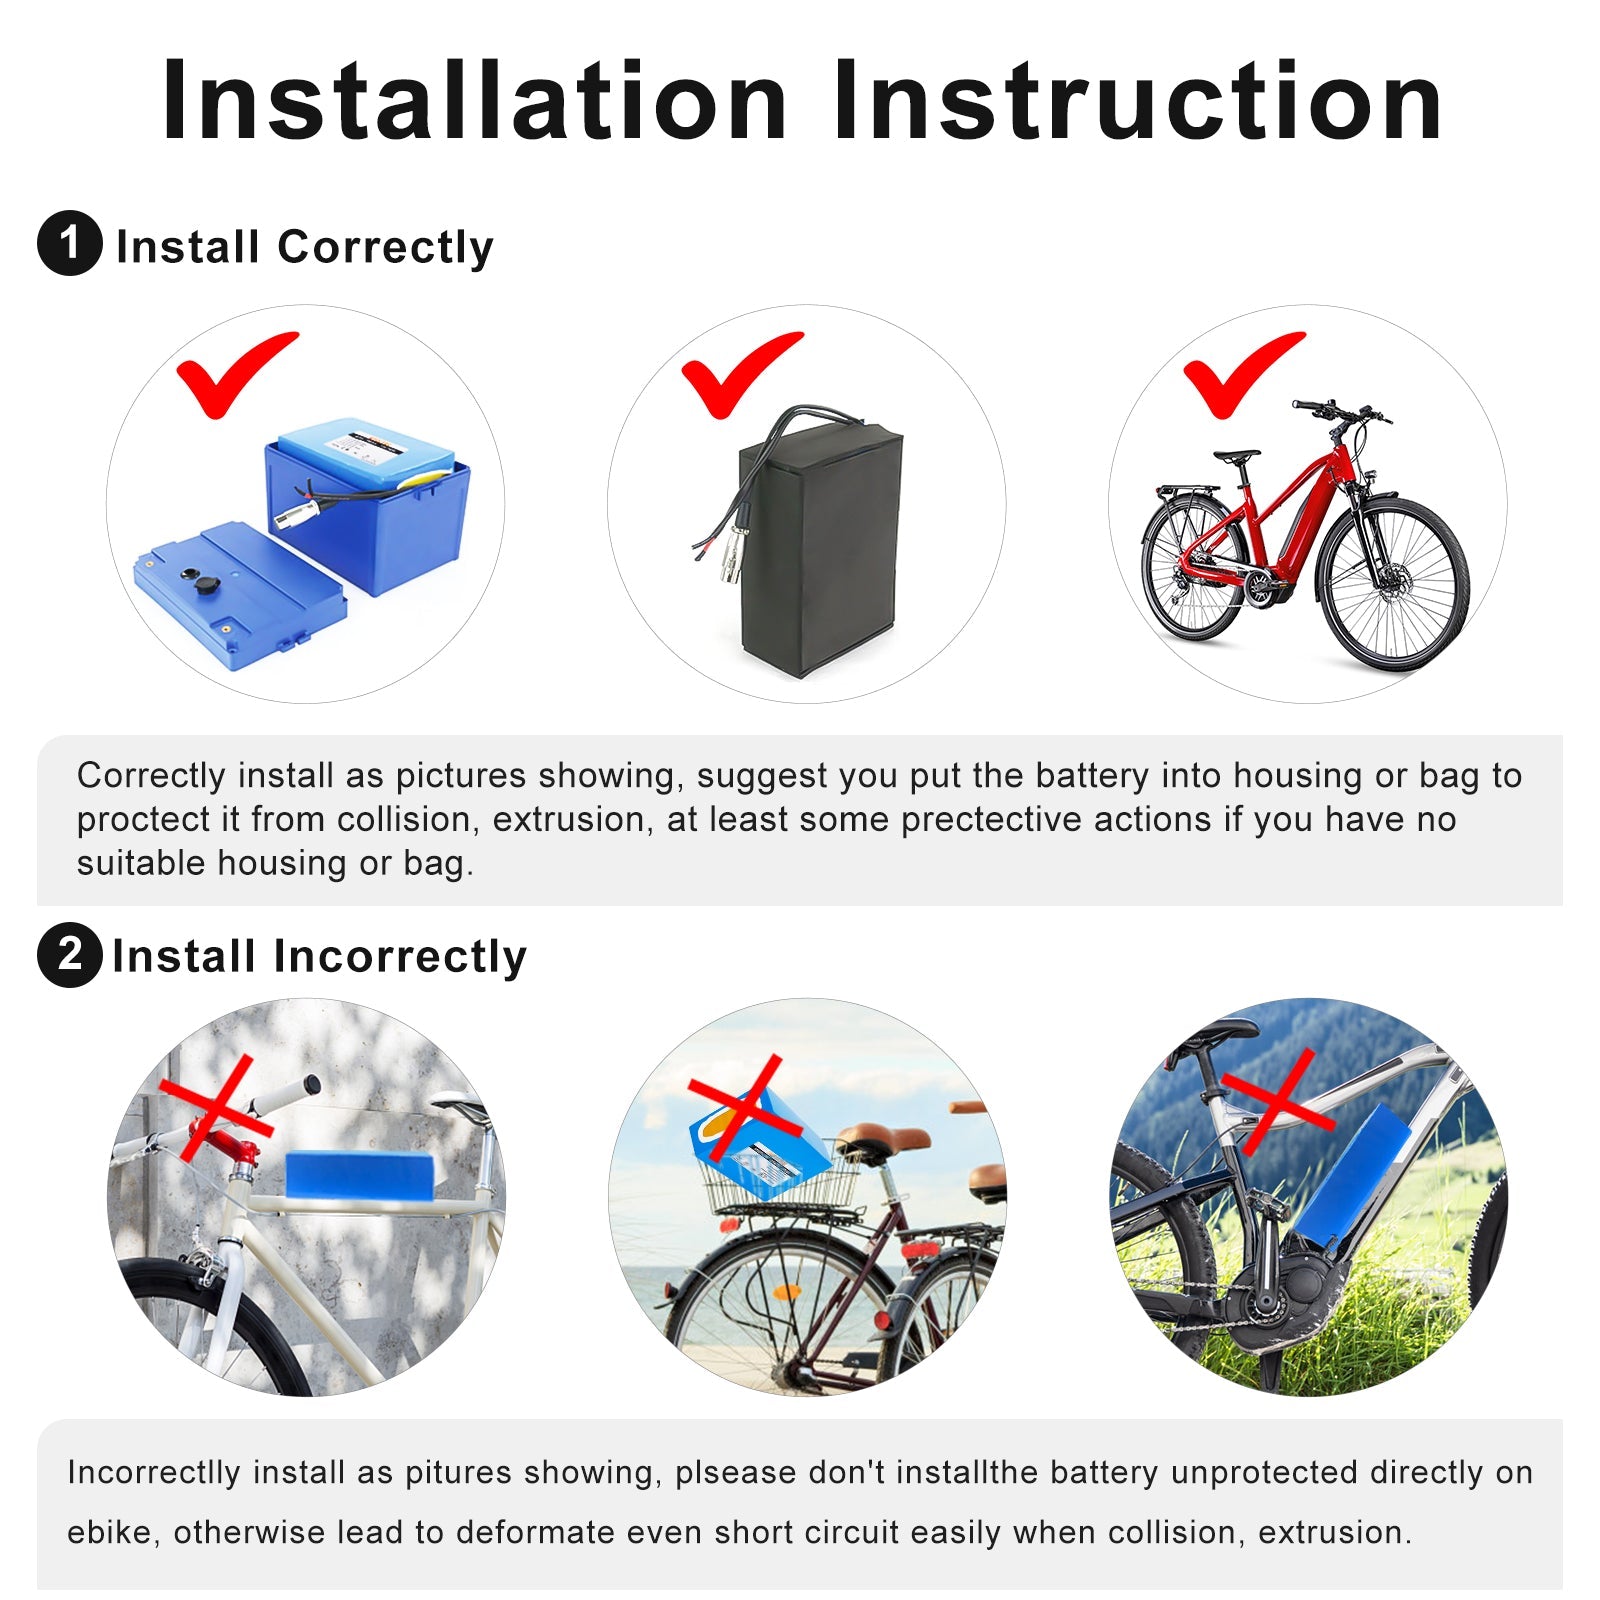 72V-40Ah Lithium Ion Electric Bike Battery - Ebike Battery for 0-3000W Bicycle - E Scooter/Go Kart Battery